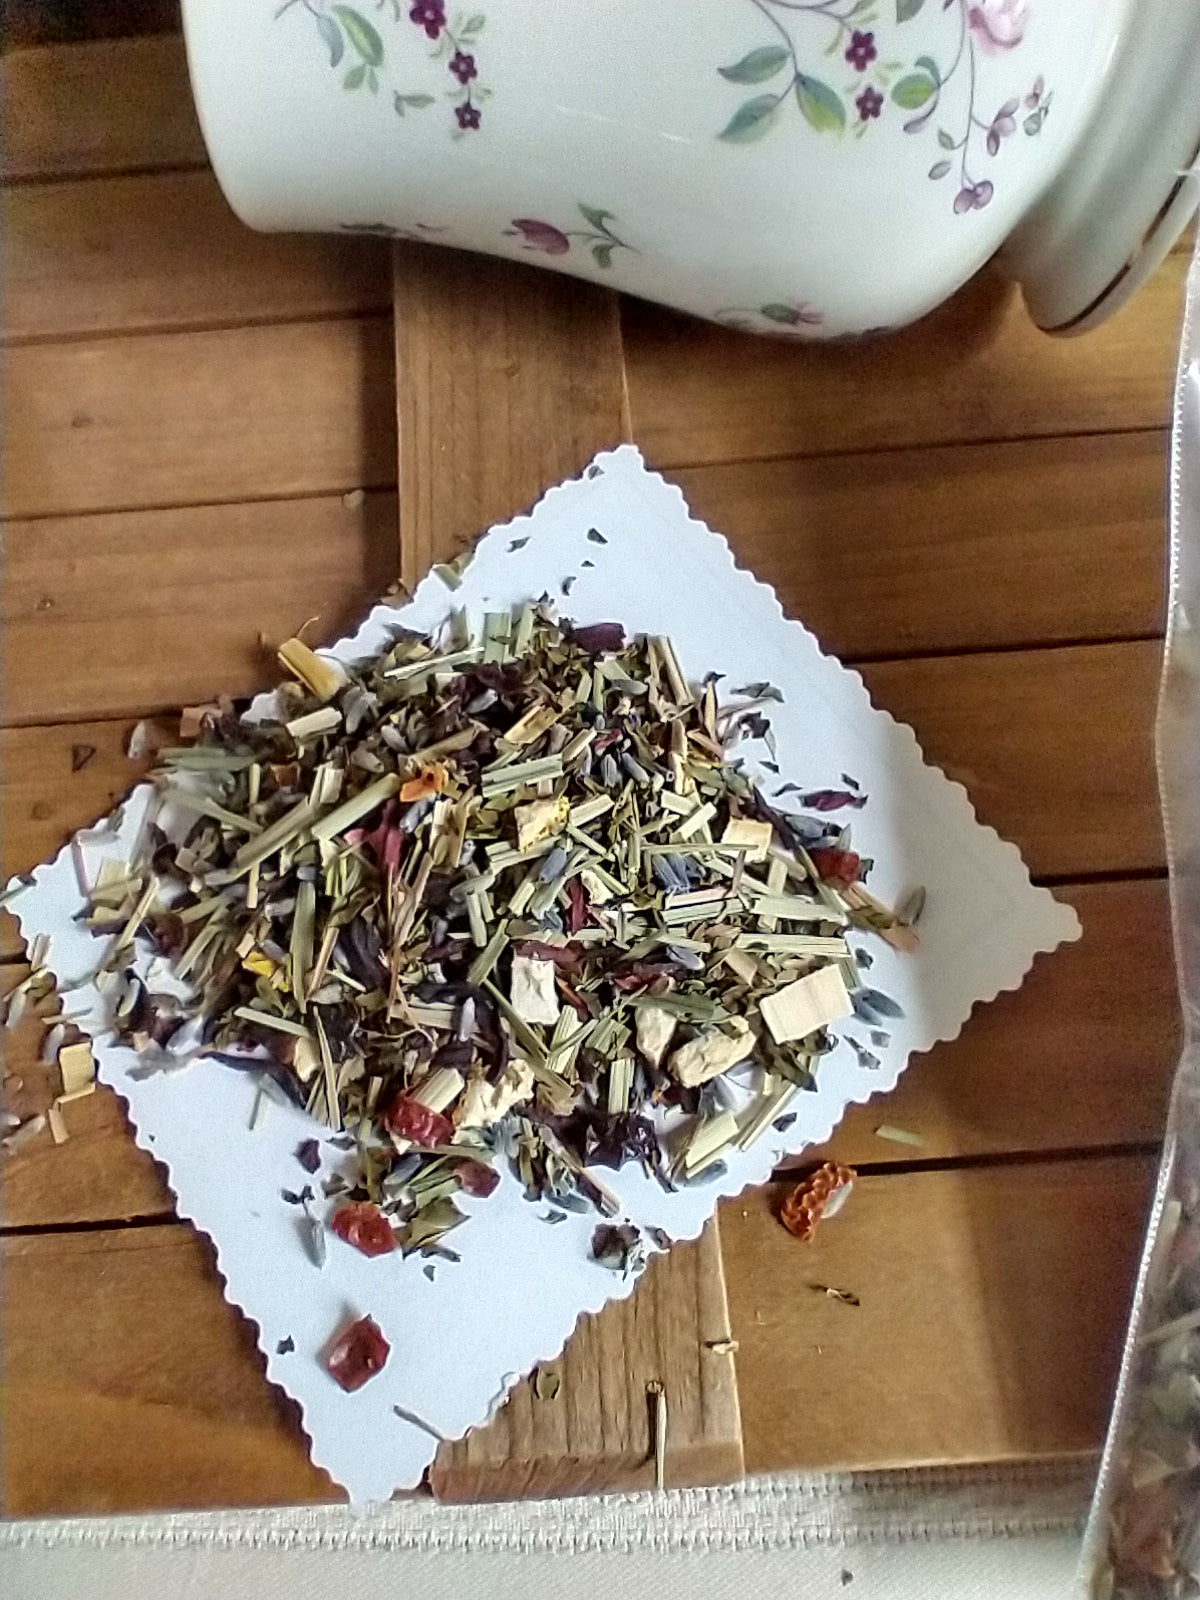 Summer Breeze Herb Tea - natural loose-leaf tea with no caffeine, great hot or iced